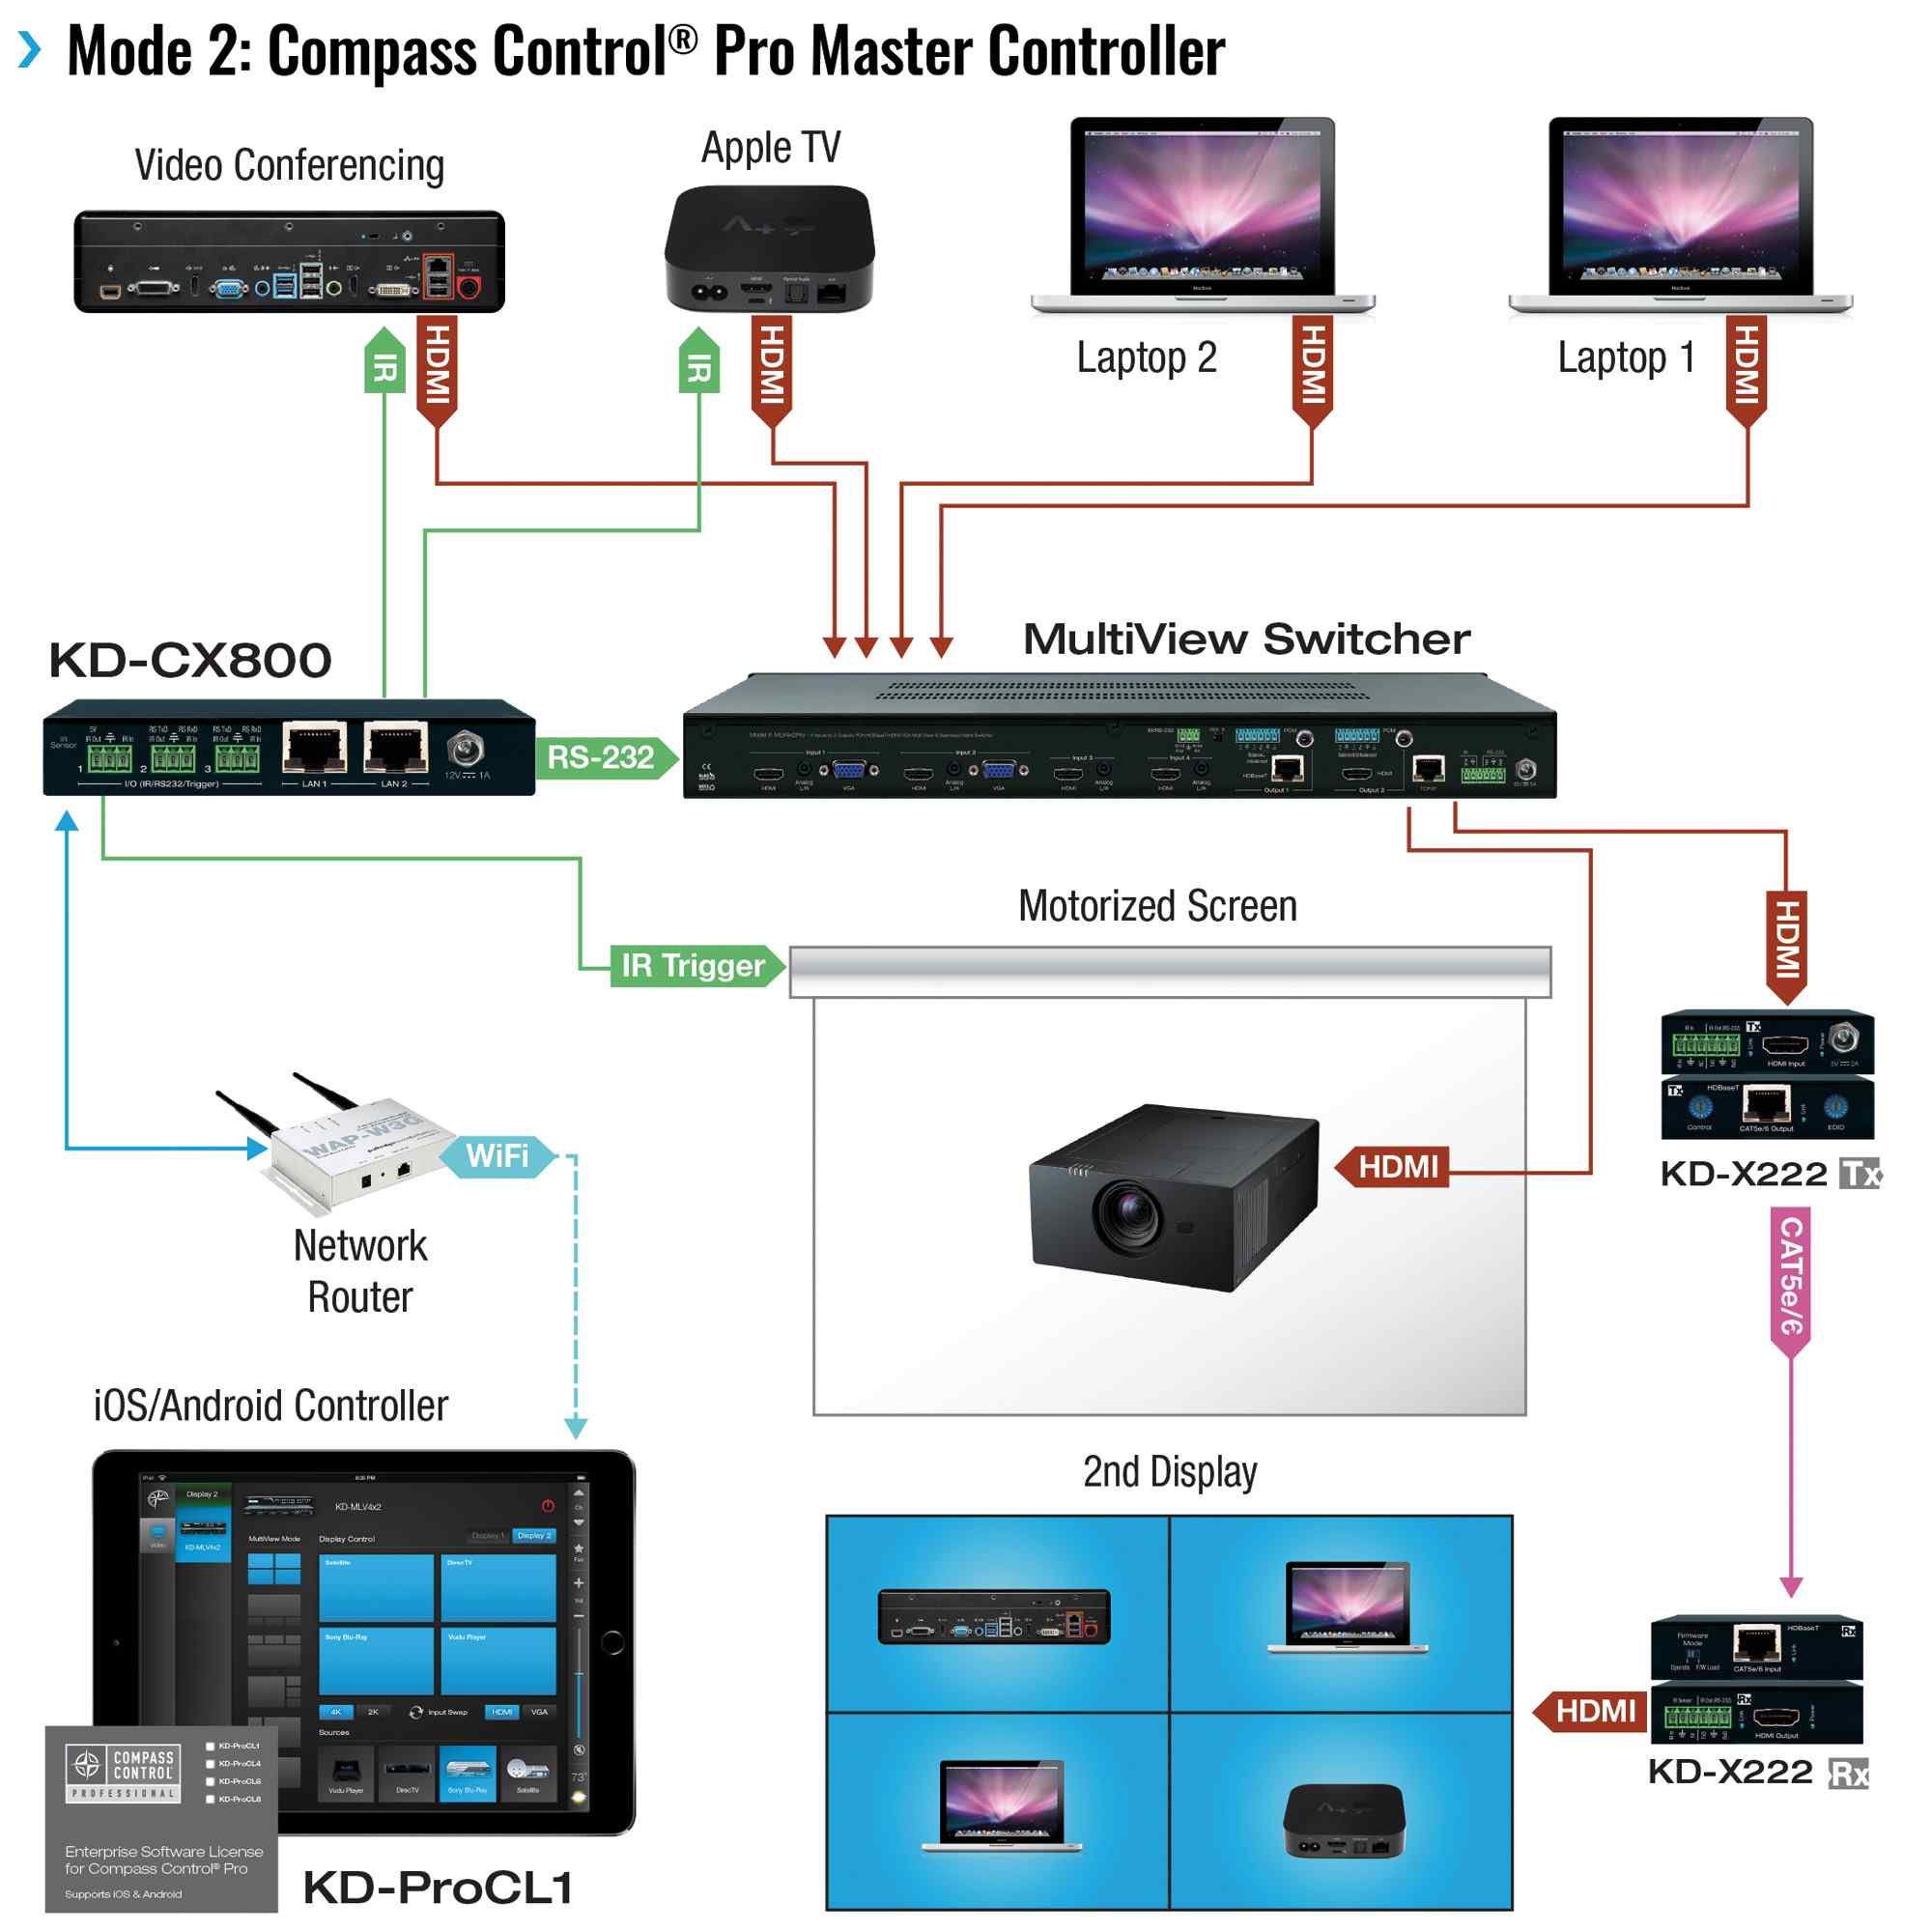 Example Diagram showing the pro master controller 